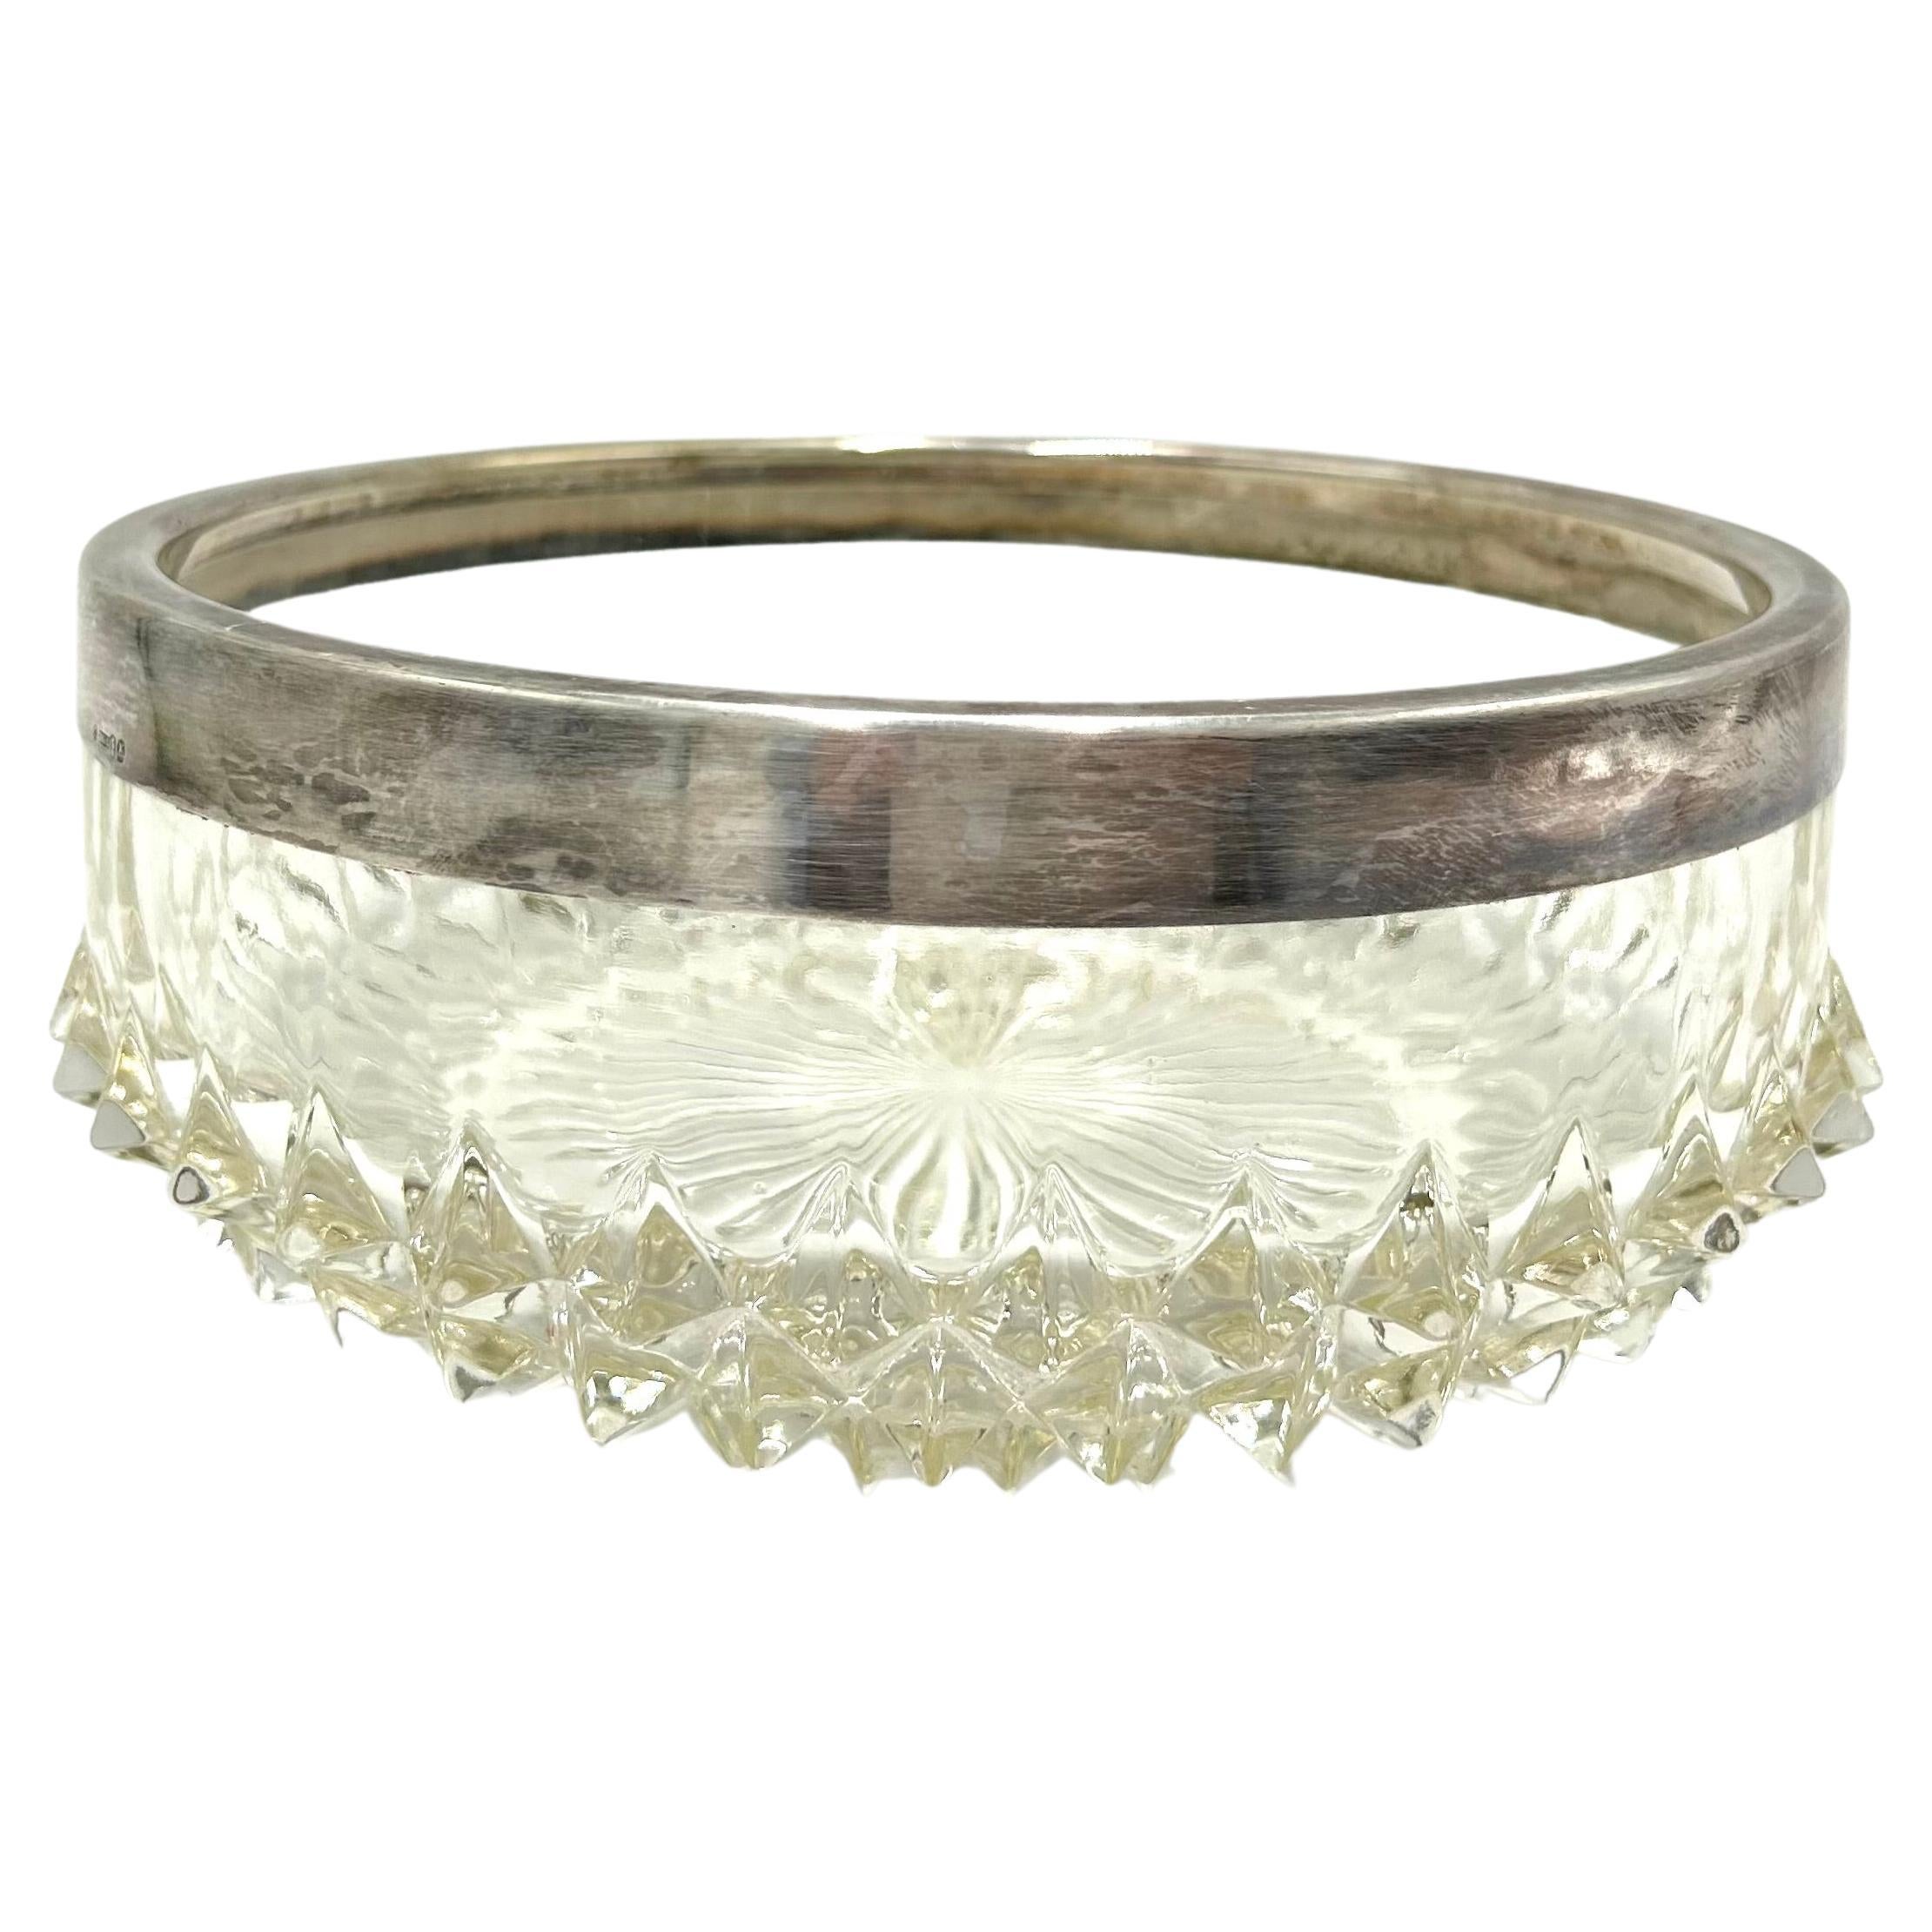 Crystal Bowl with a Silver Ring For Sale